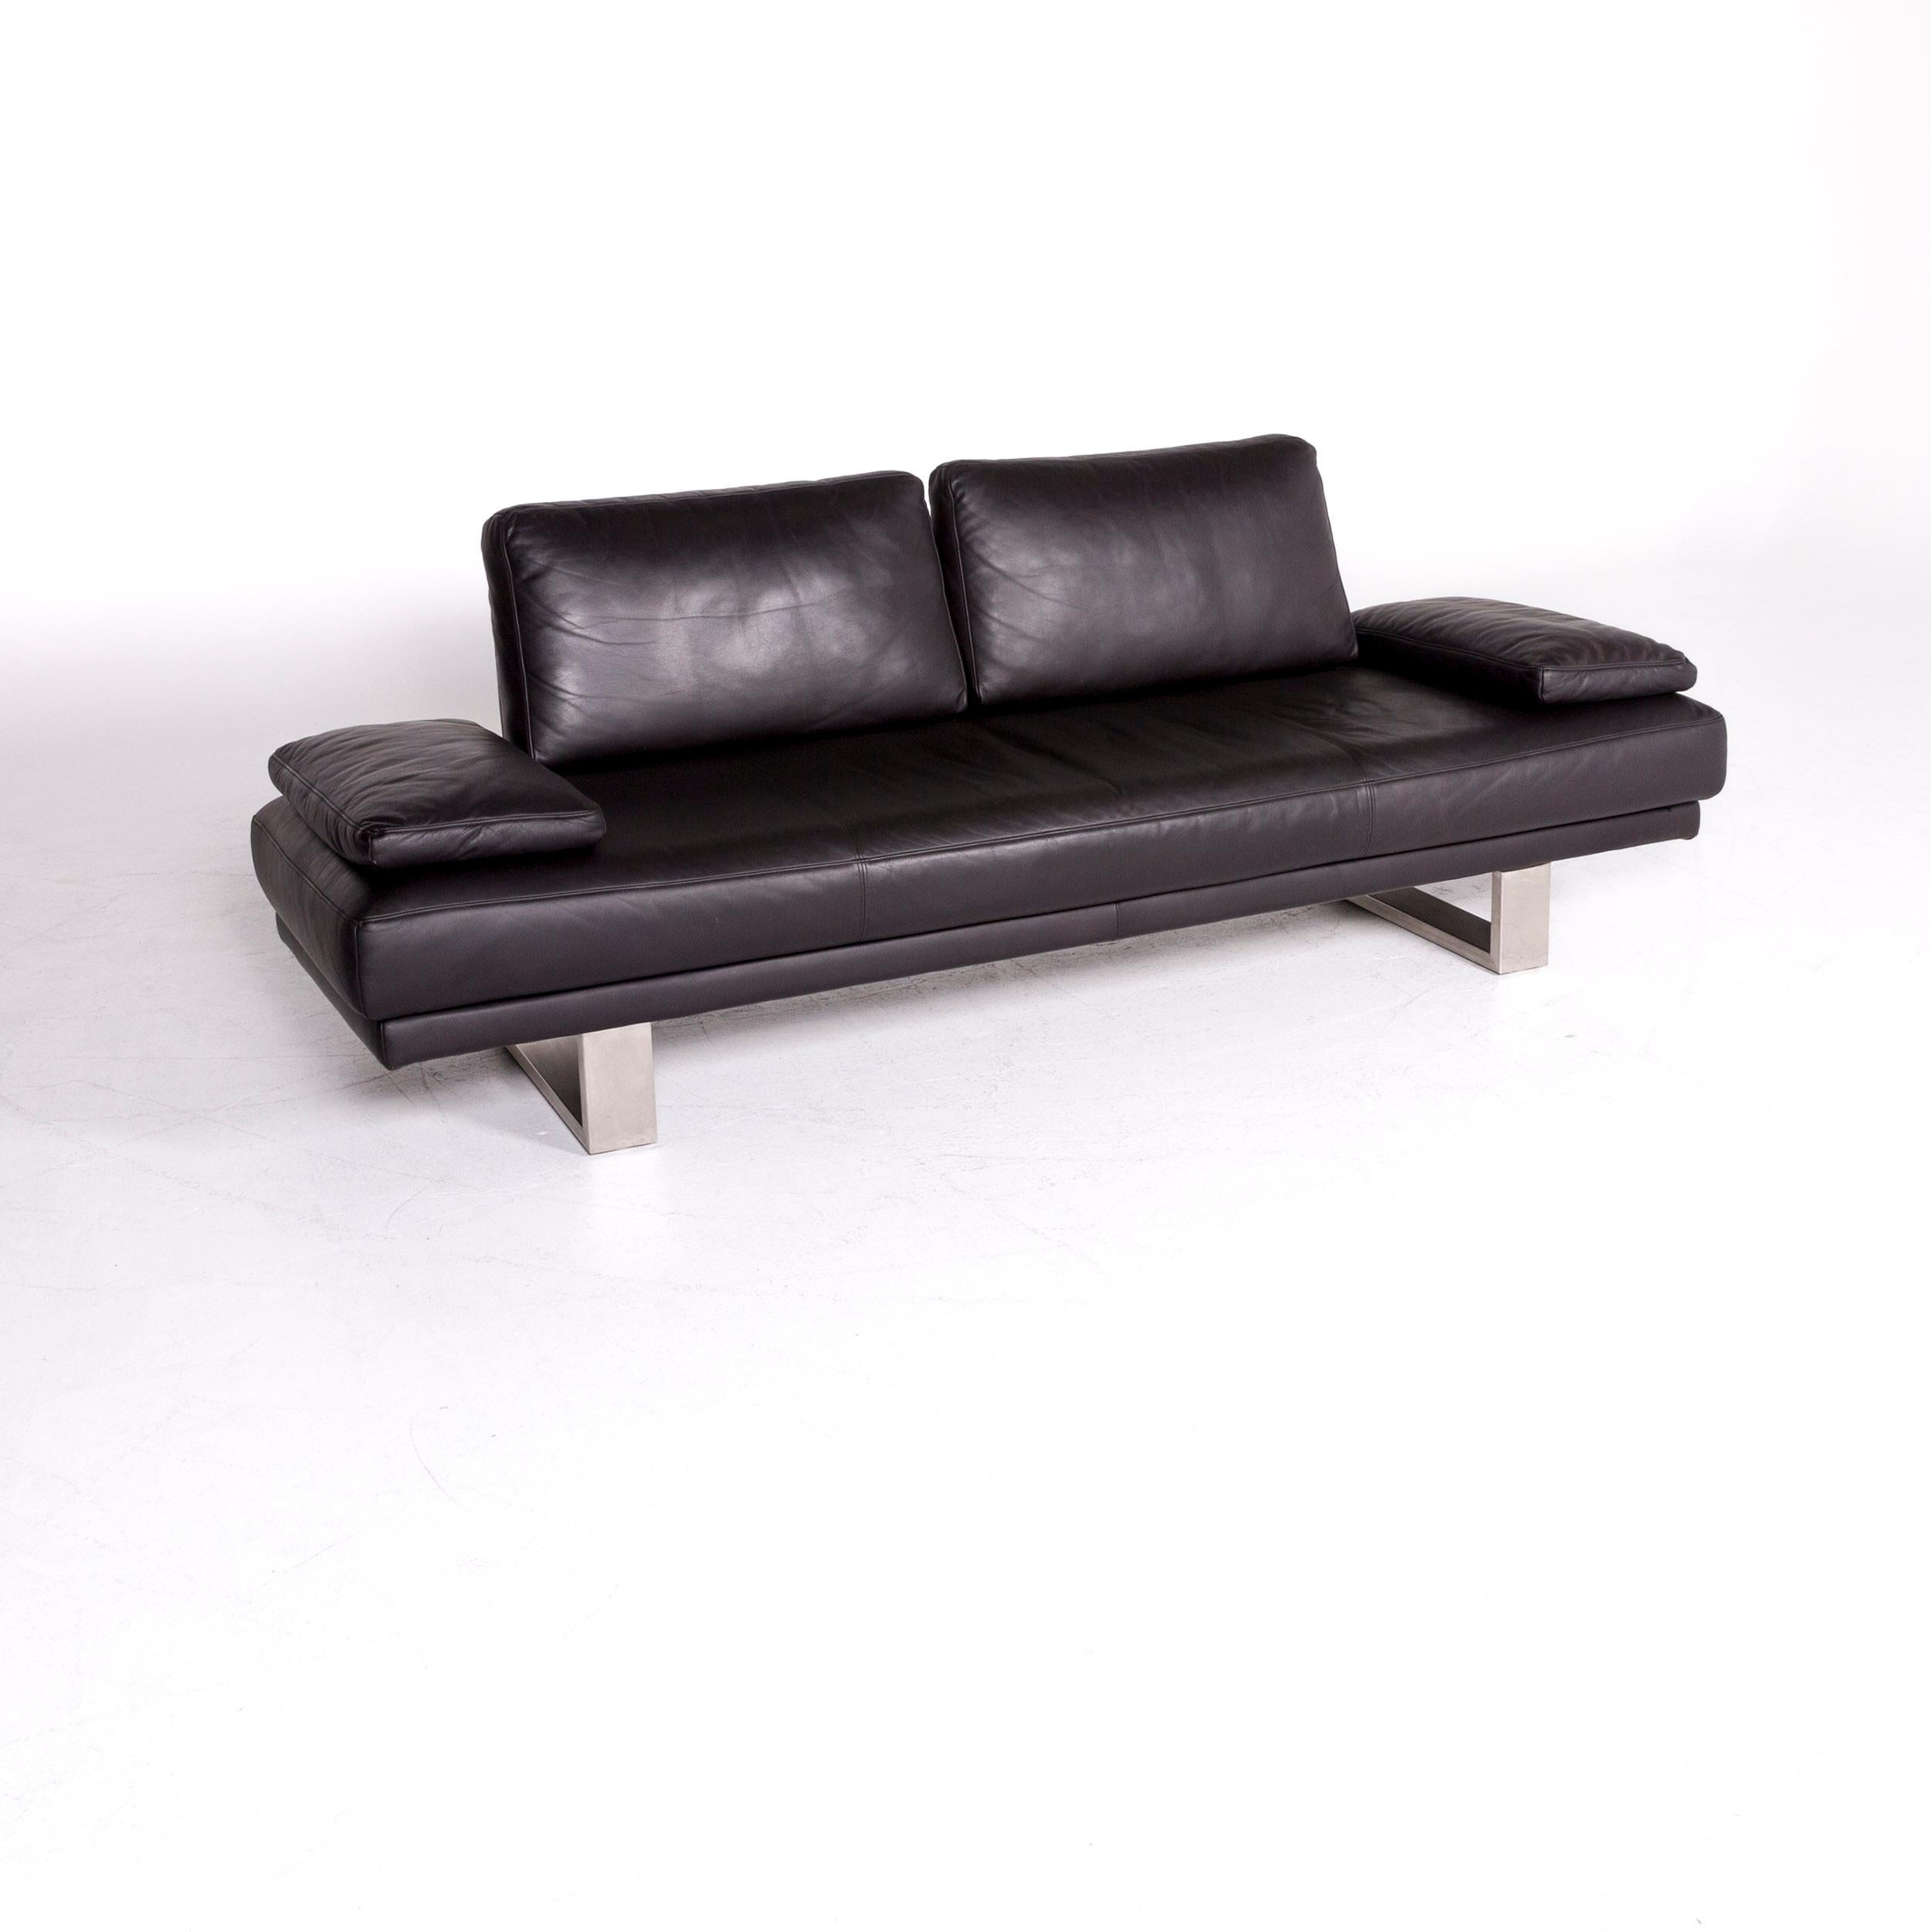 We bring to you a Rolf Benz 6600 designer leather sofa black two-seat couch.

Product measurements in centimeters:

Depth 86
Width 227
Height 83
Seat-height 44
Rest-height 54
Seat-depth 54
Seat-width 154
Back-height 39.
    